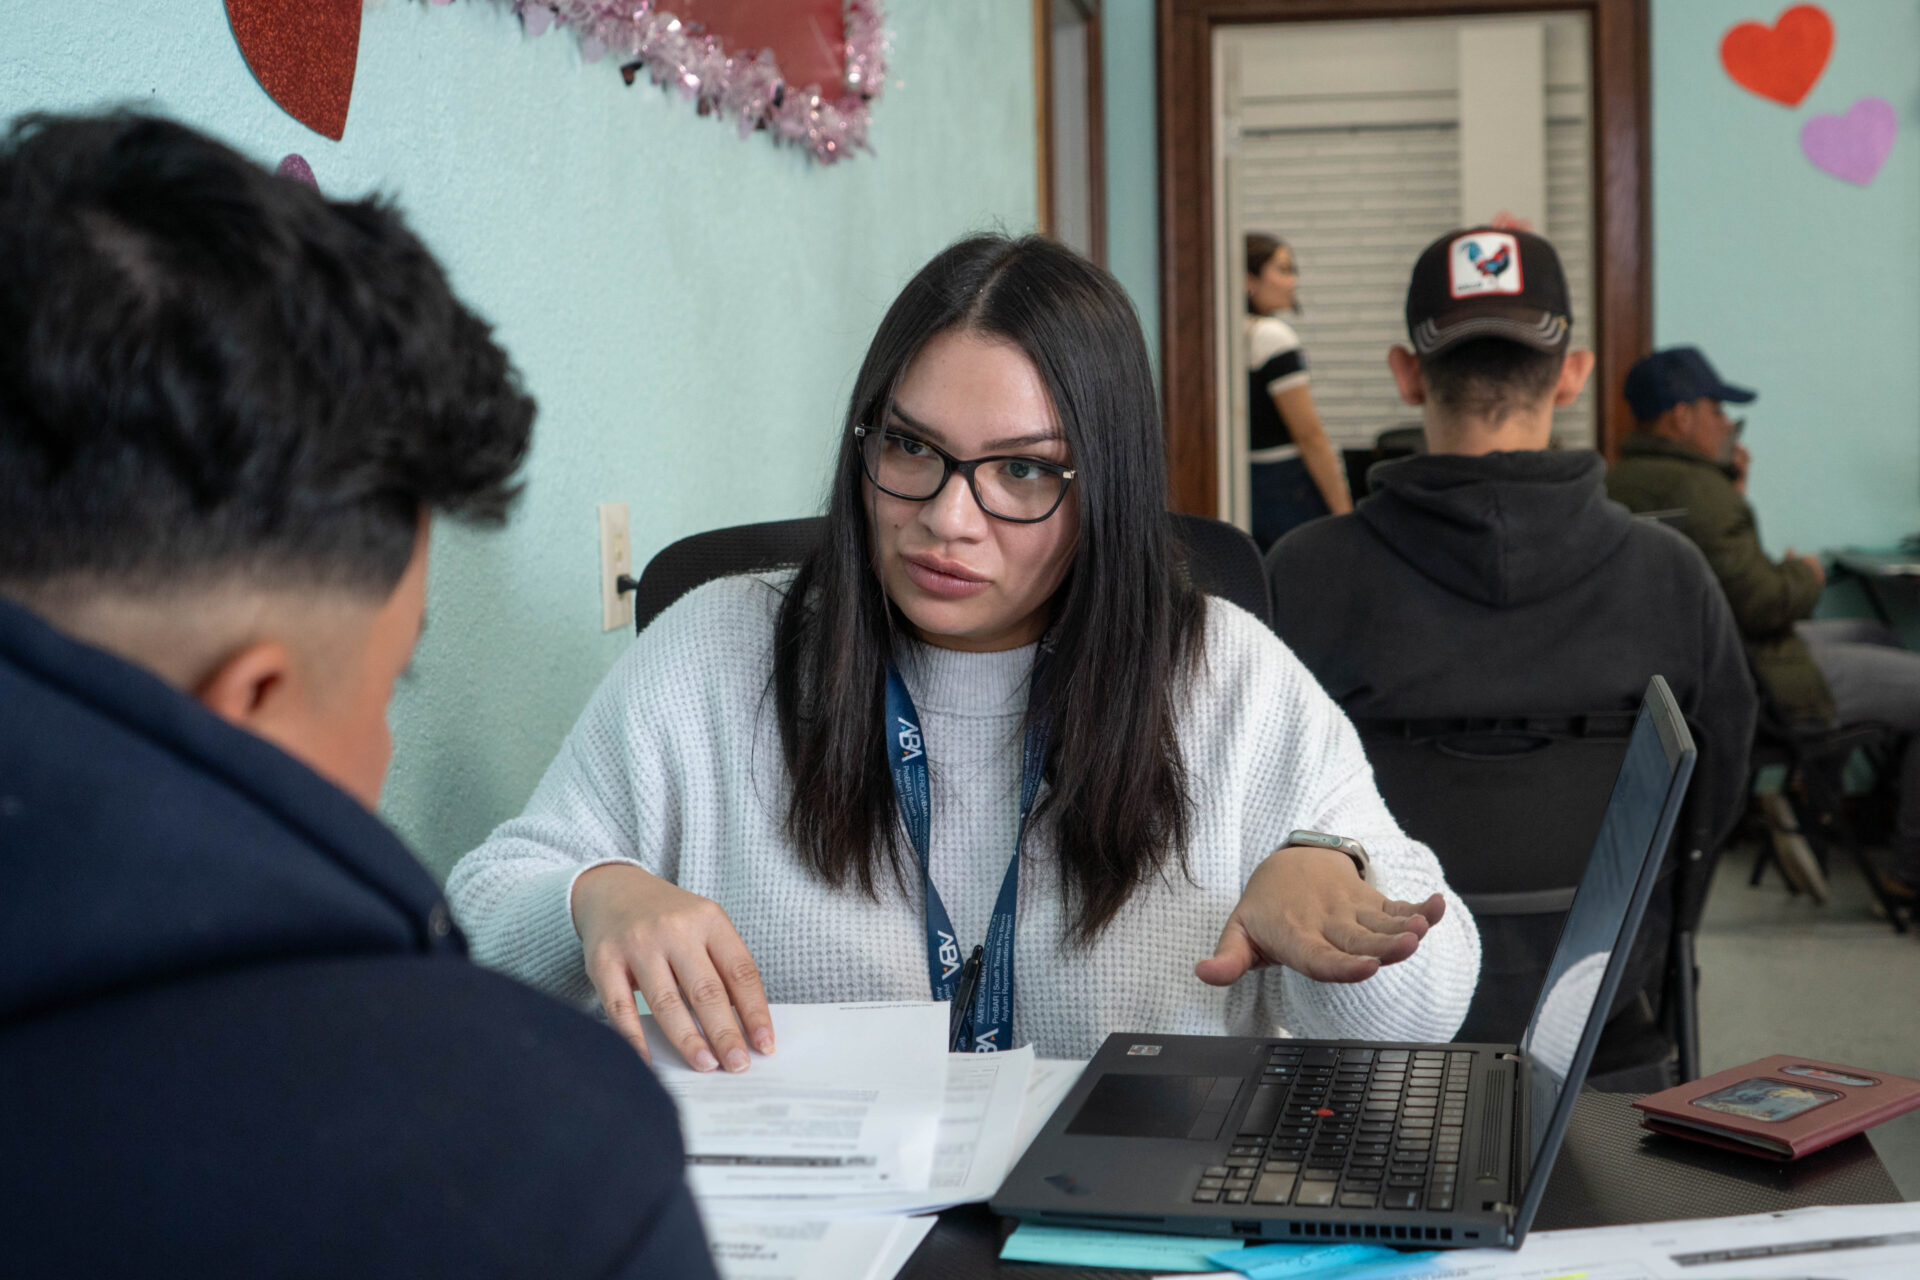 A ProBAR team member wearing a white sweater, long black hair, and glasses assists a young man with filling out a Work Authorization form.